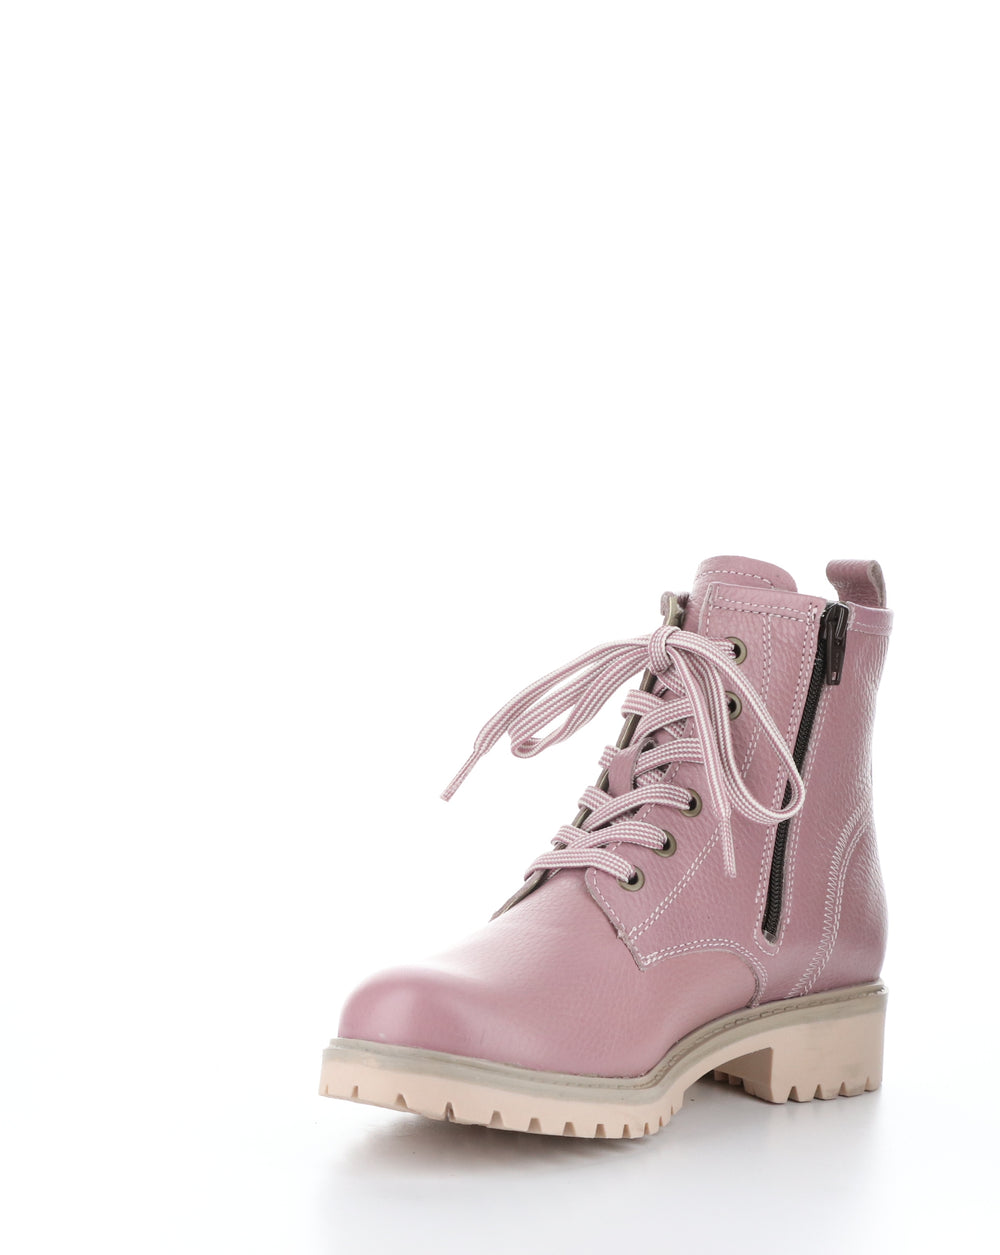 CARINAS PINK Round Toe Boots